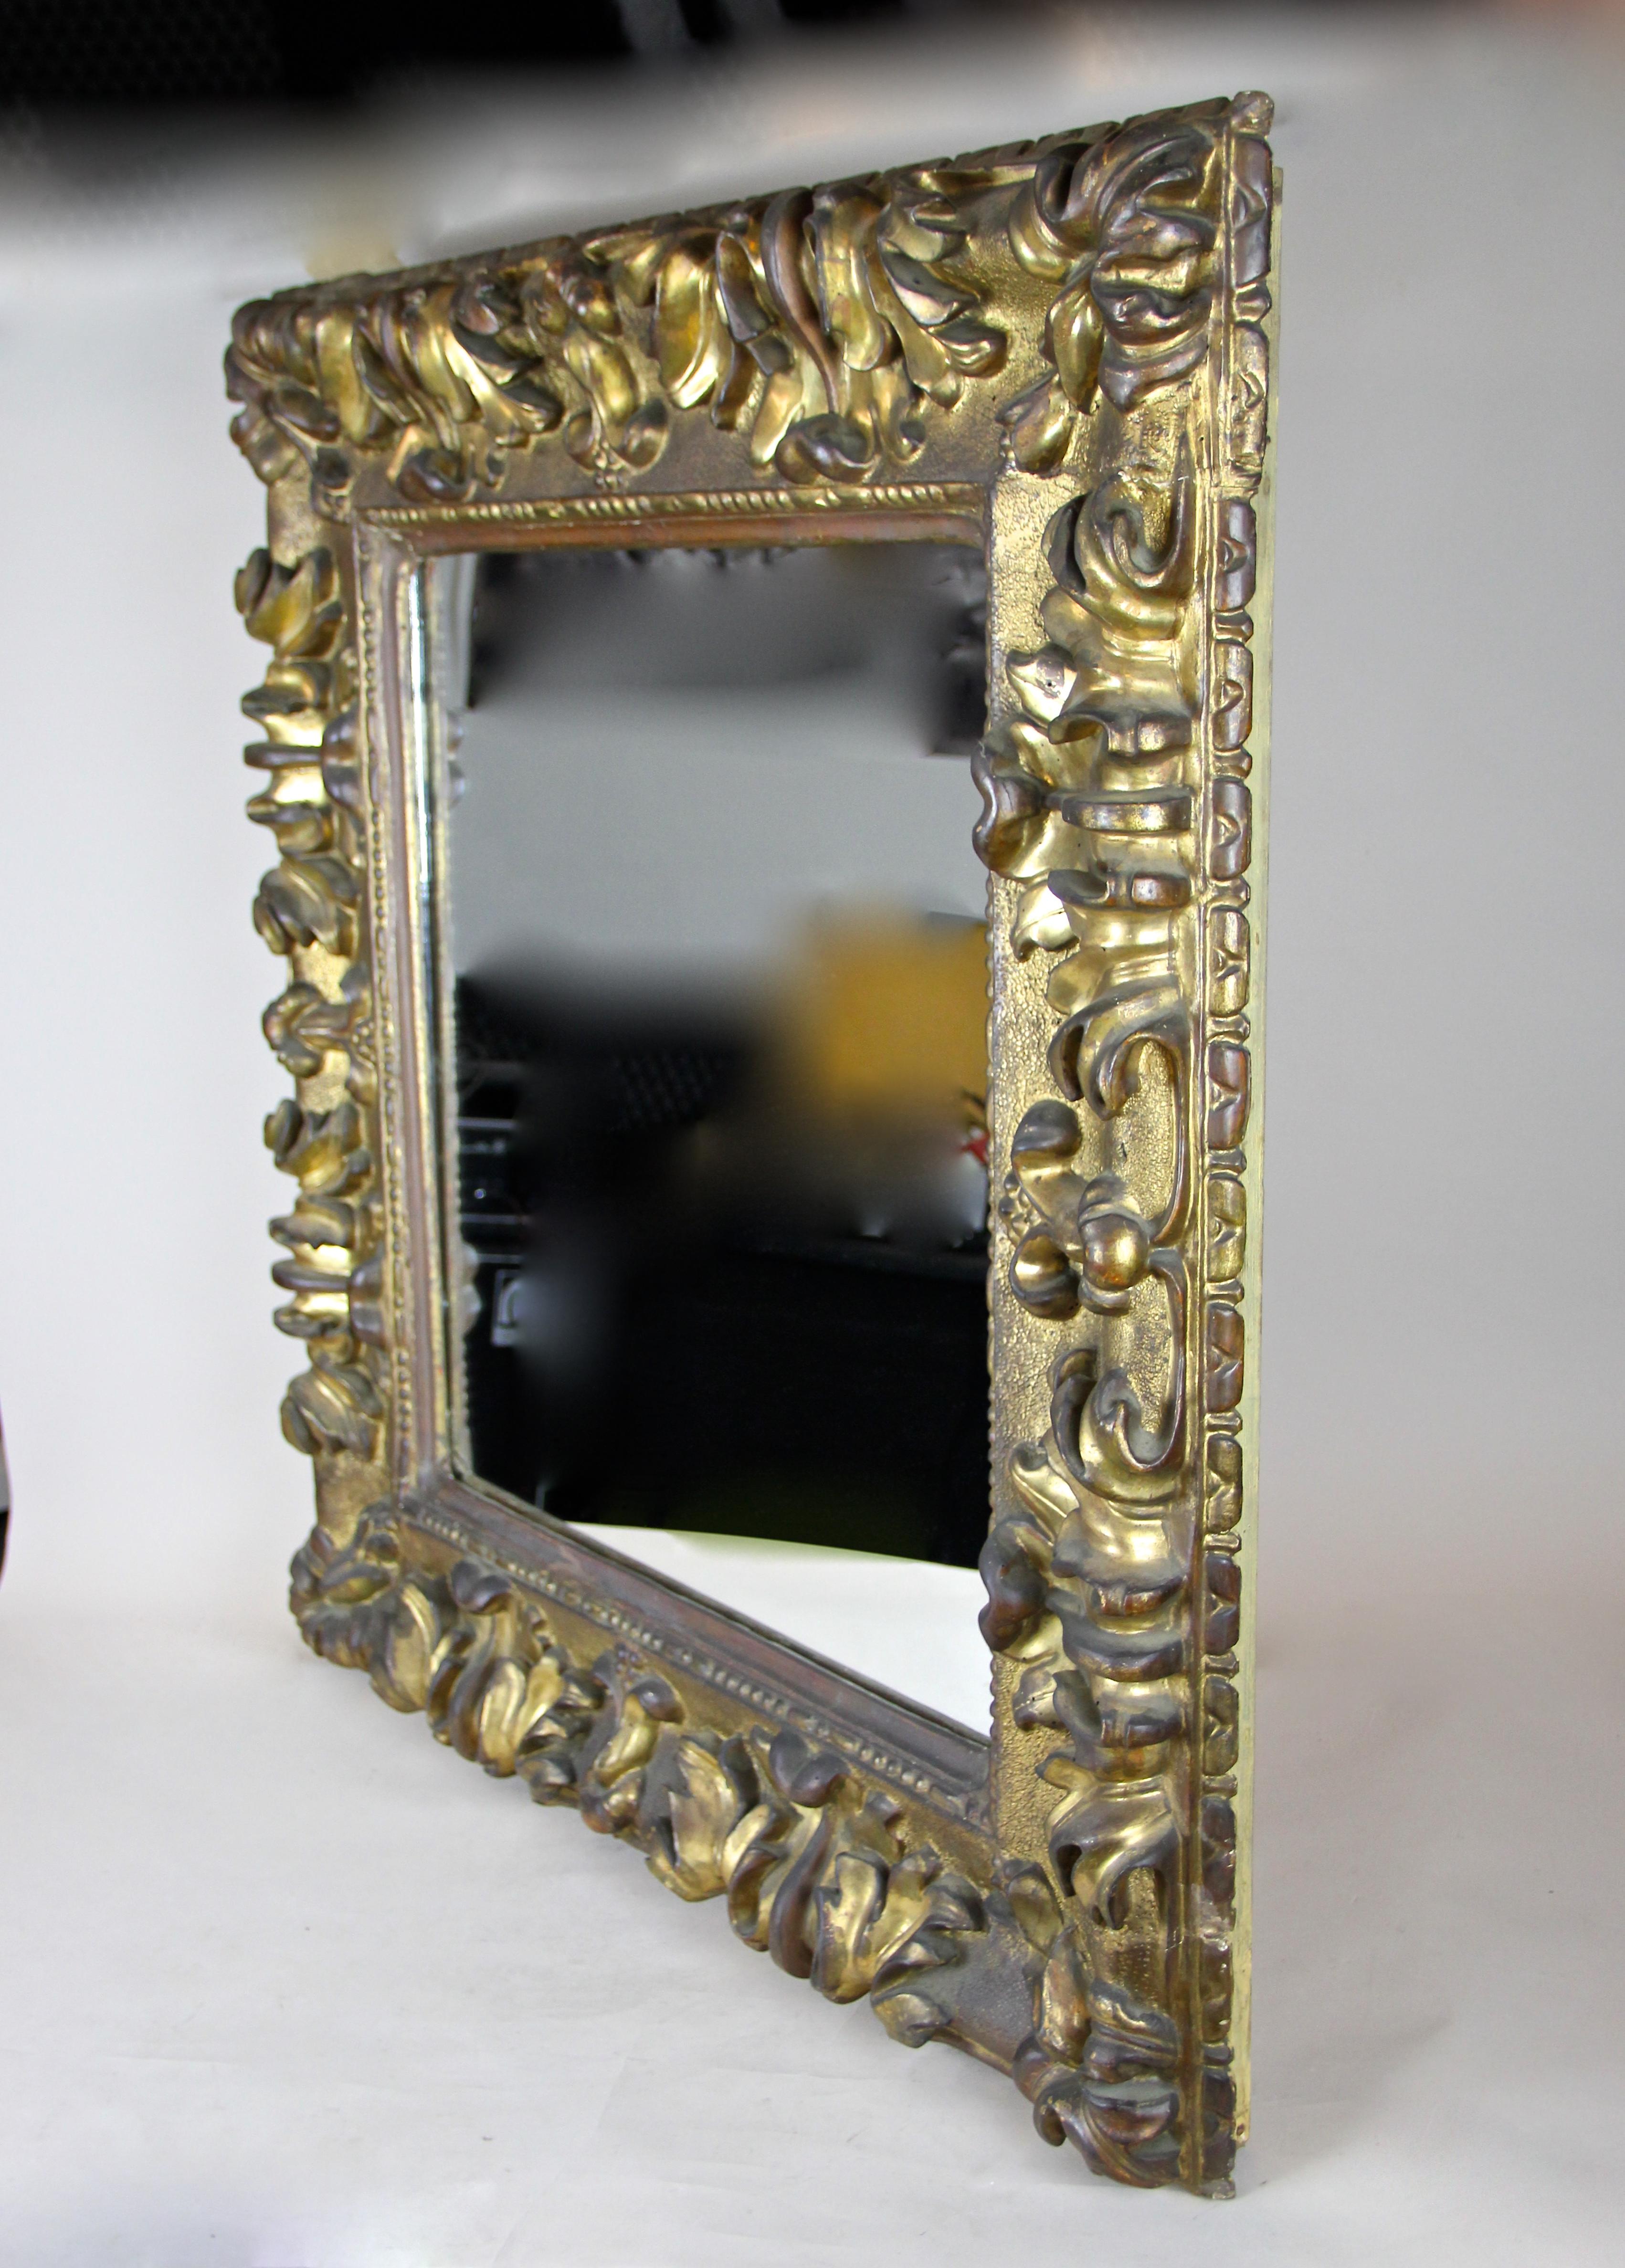 Absolutely outstanding gilt Baroque Wall Mirror from the very early 18th century in Austria. This solid mirror from around 1700 comes in amazing untouched condition. We only had to clean it carefully and renew the mirror glass during this process